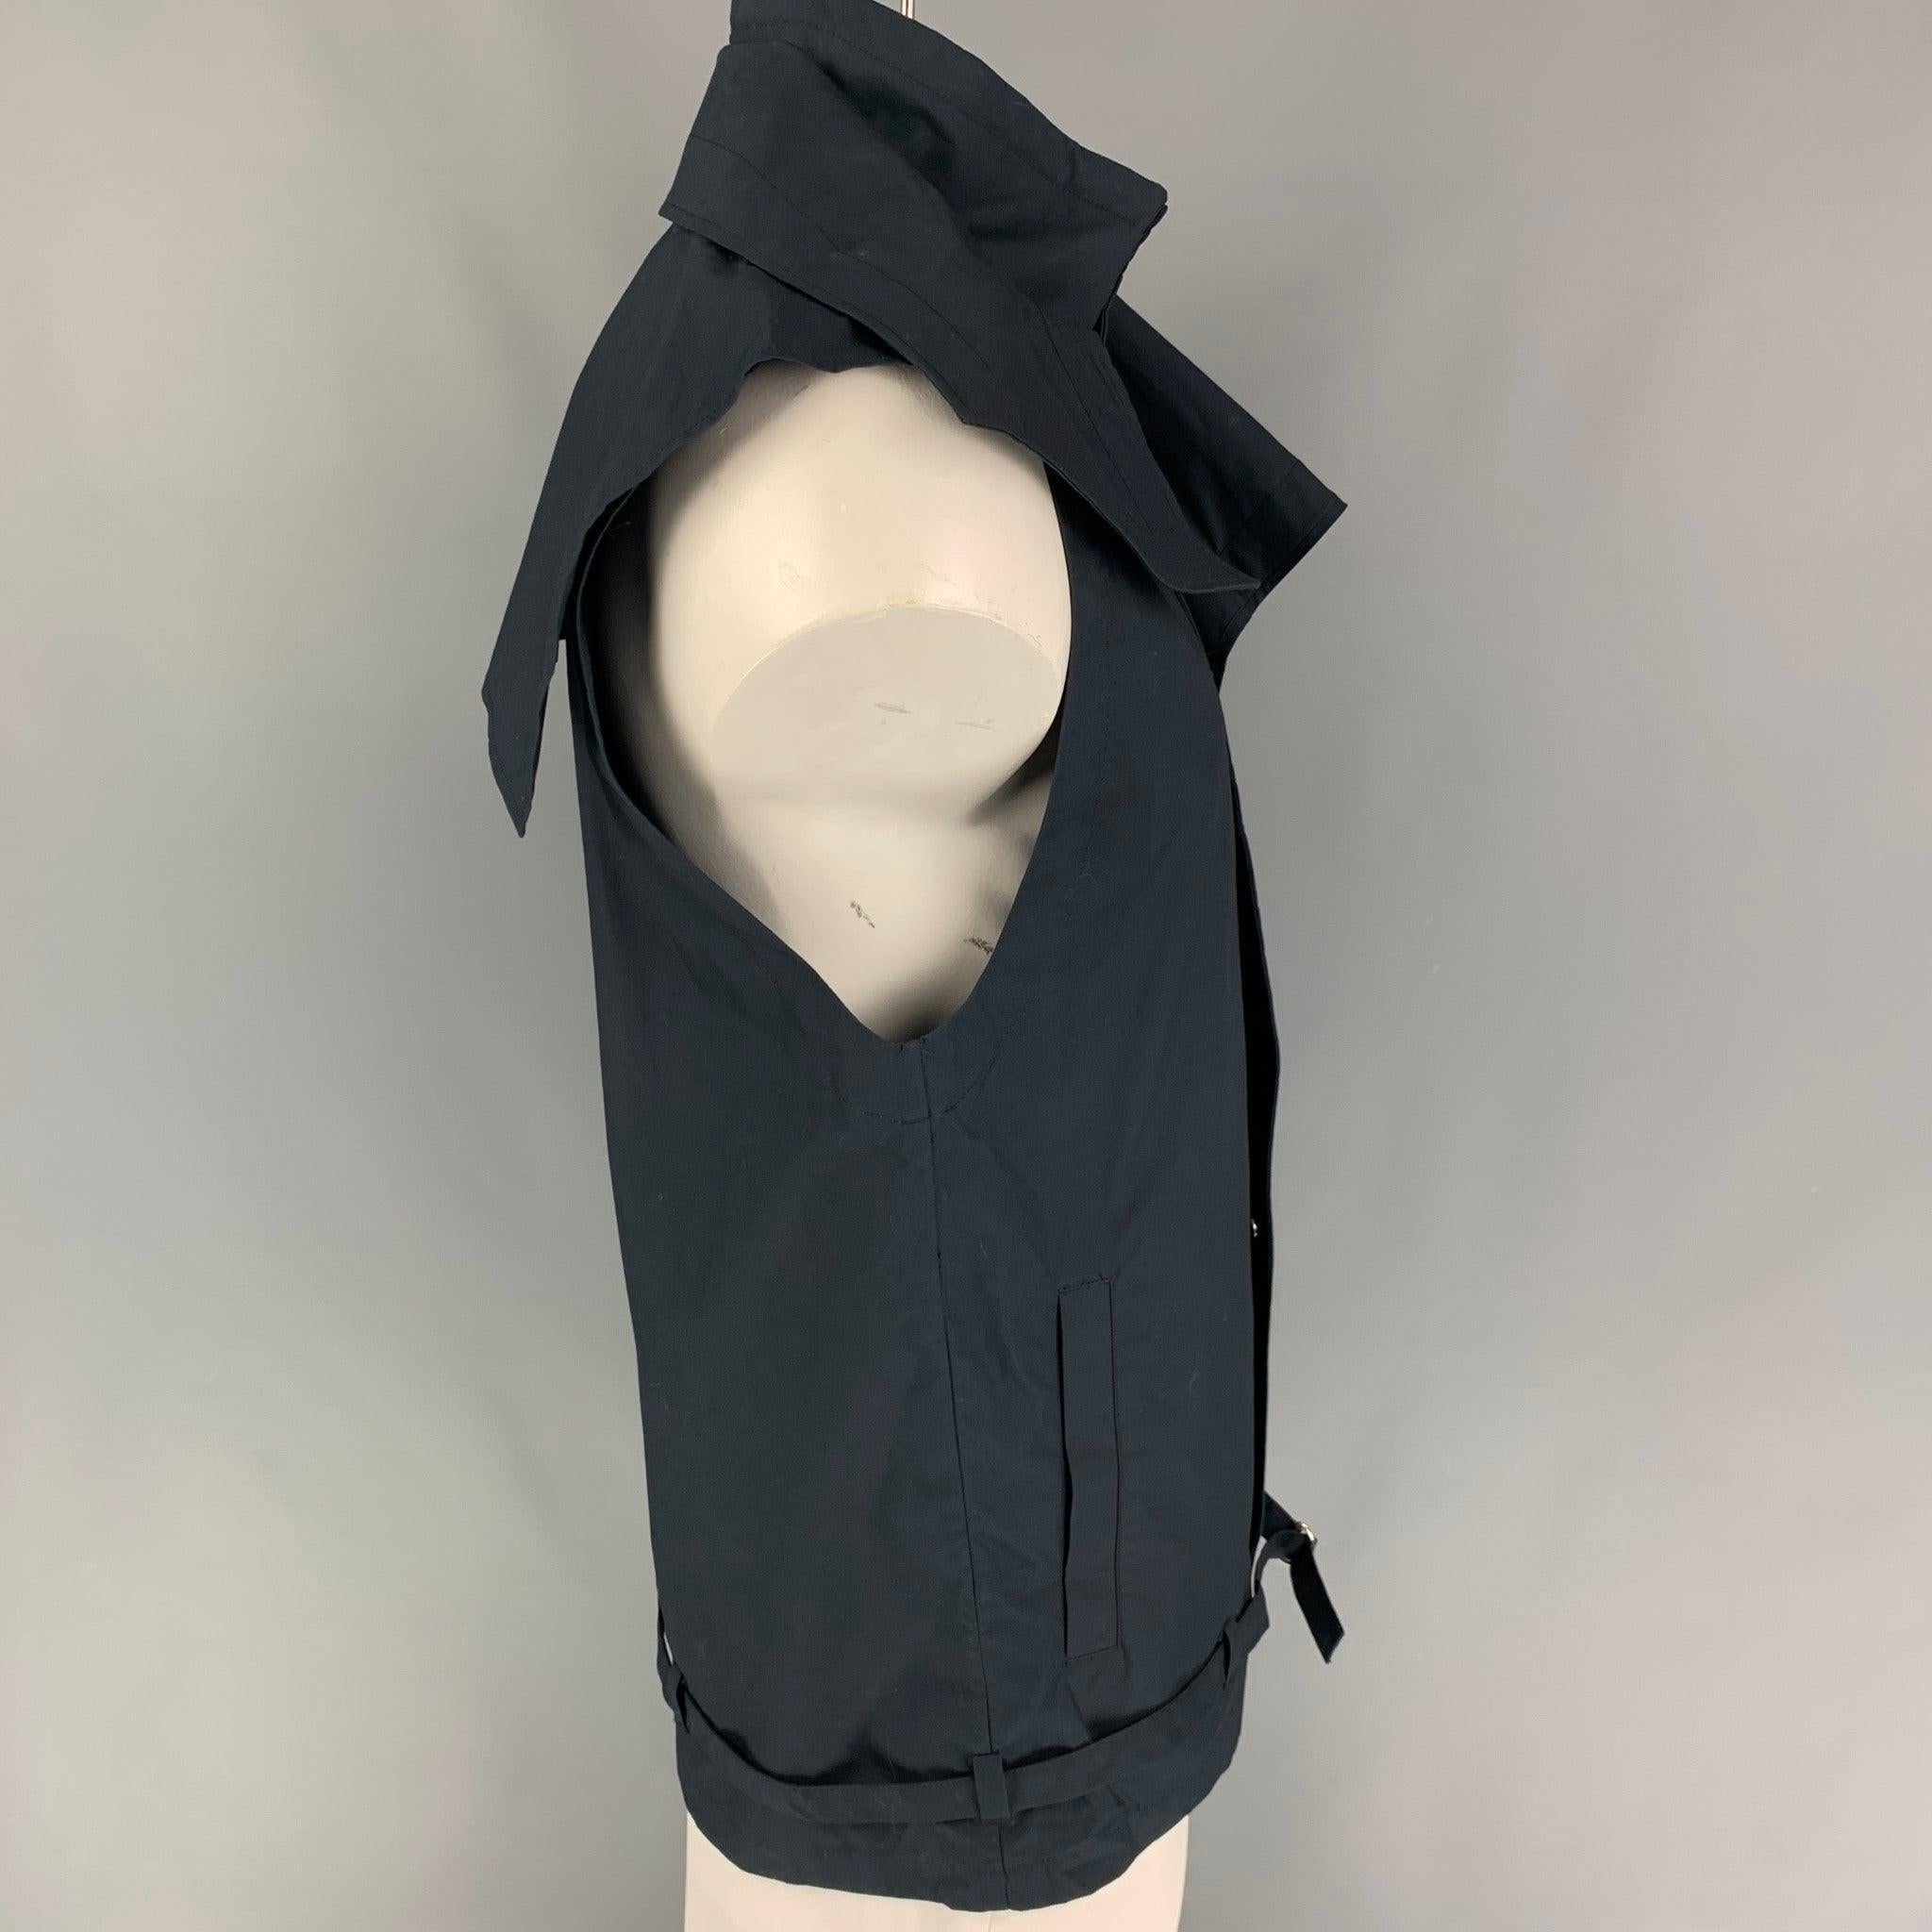 3.1 PHILLIP LIM vest comes in a navy cotton featuring a detachable collar, front pockets, belted detail, and a hidden snap button closure.
Very Good
Pre-Owned Condition. 

Marked:   S 

Measurements: 
 
Shoulder: 18 inches  Chest: 42 inches  Length: